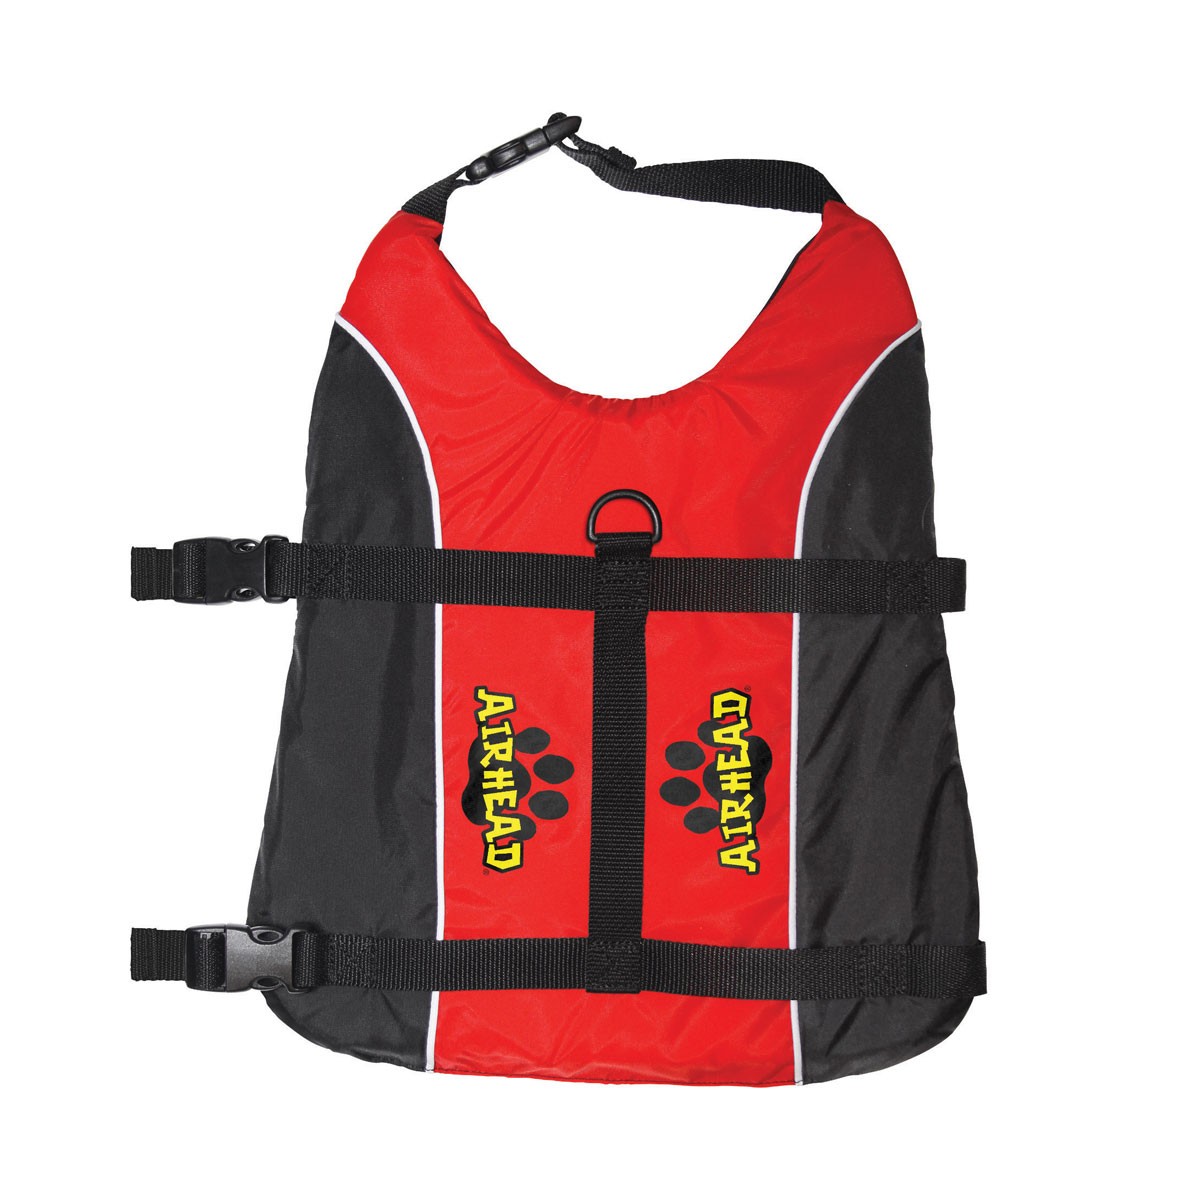 D-1302-a-rd Pet Vest - Large & Extra Large, Red